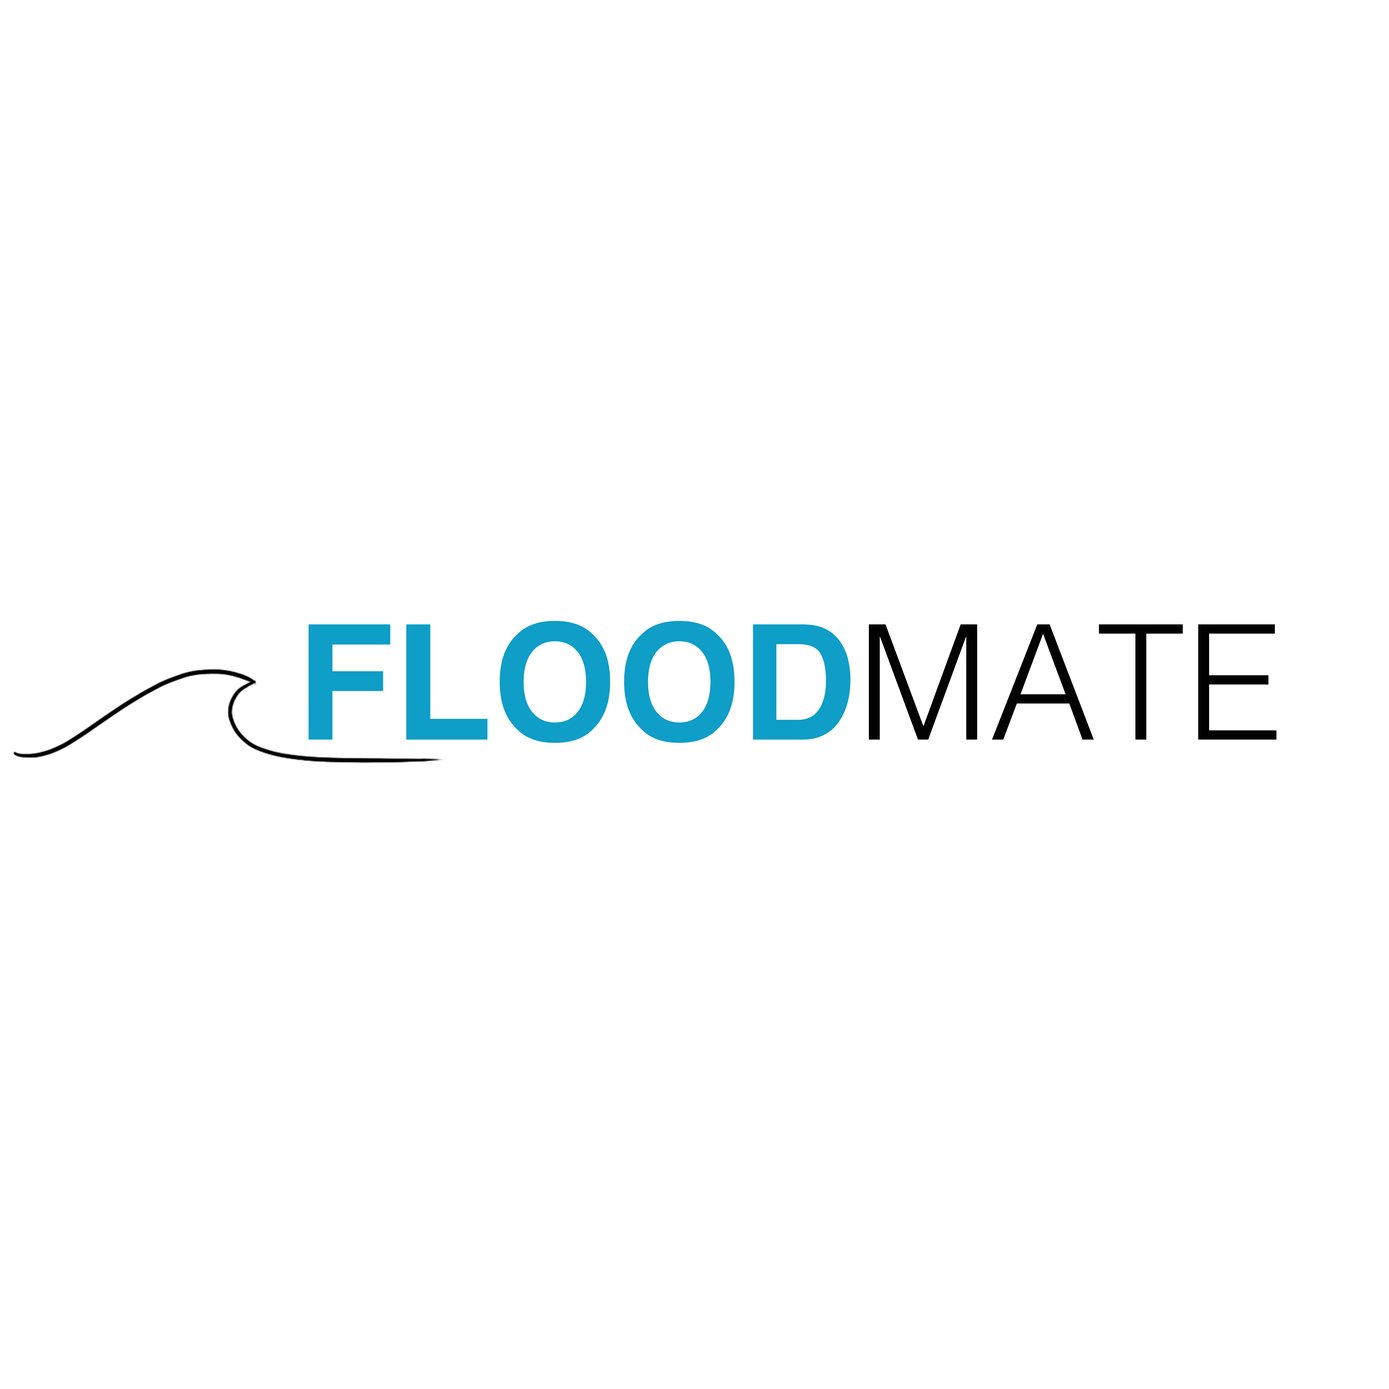 The Emergency Flood Barrier product - Don't let a flood ruin your home or business 💦- Contact us
-
📧 info@floodmate.co.uk
-
📱0800 0932 690